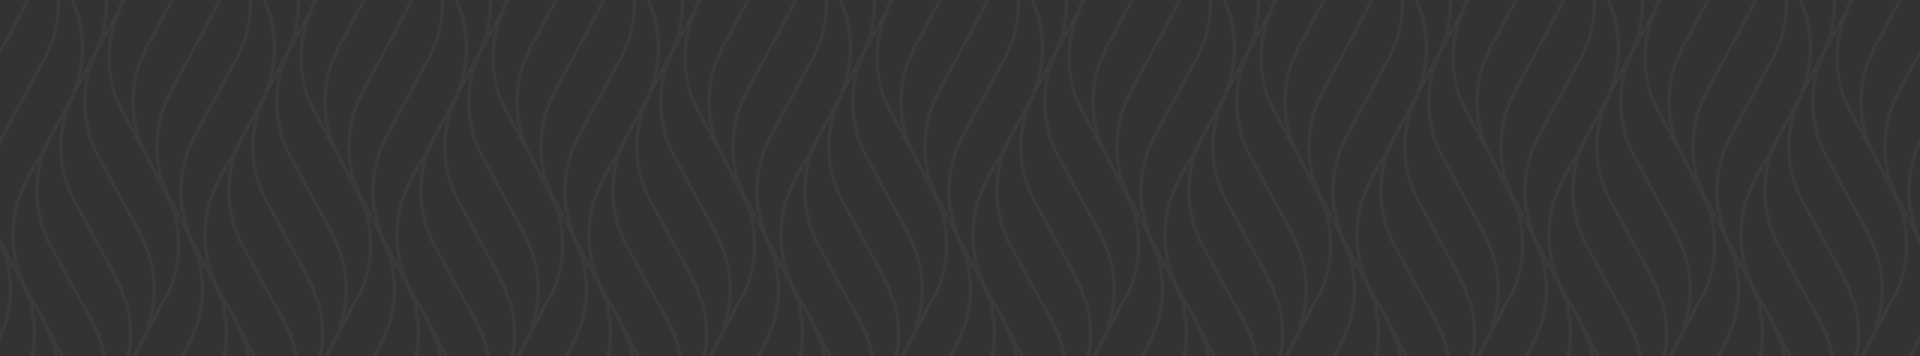 A black background with wavy lines and waves.